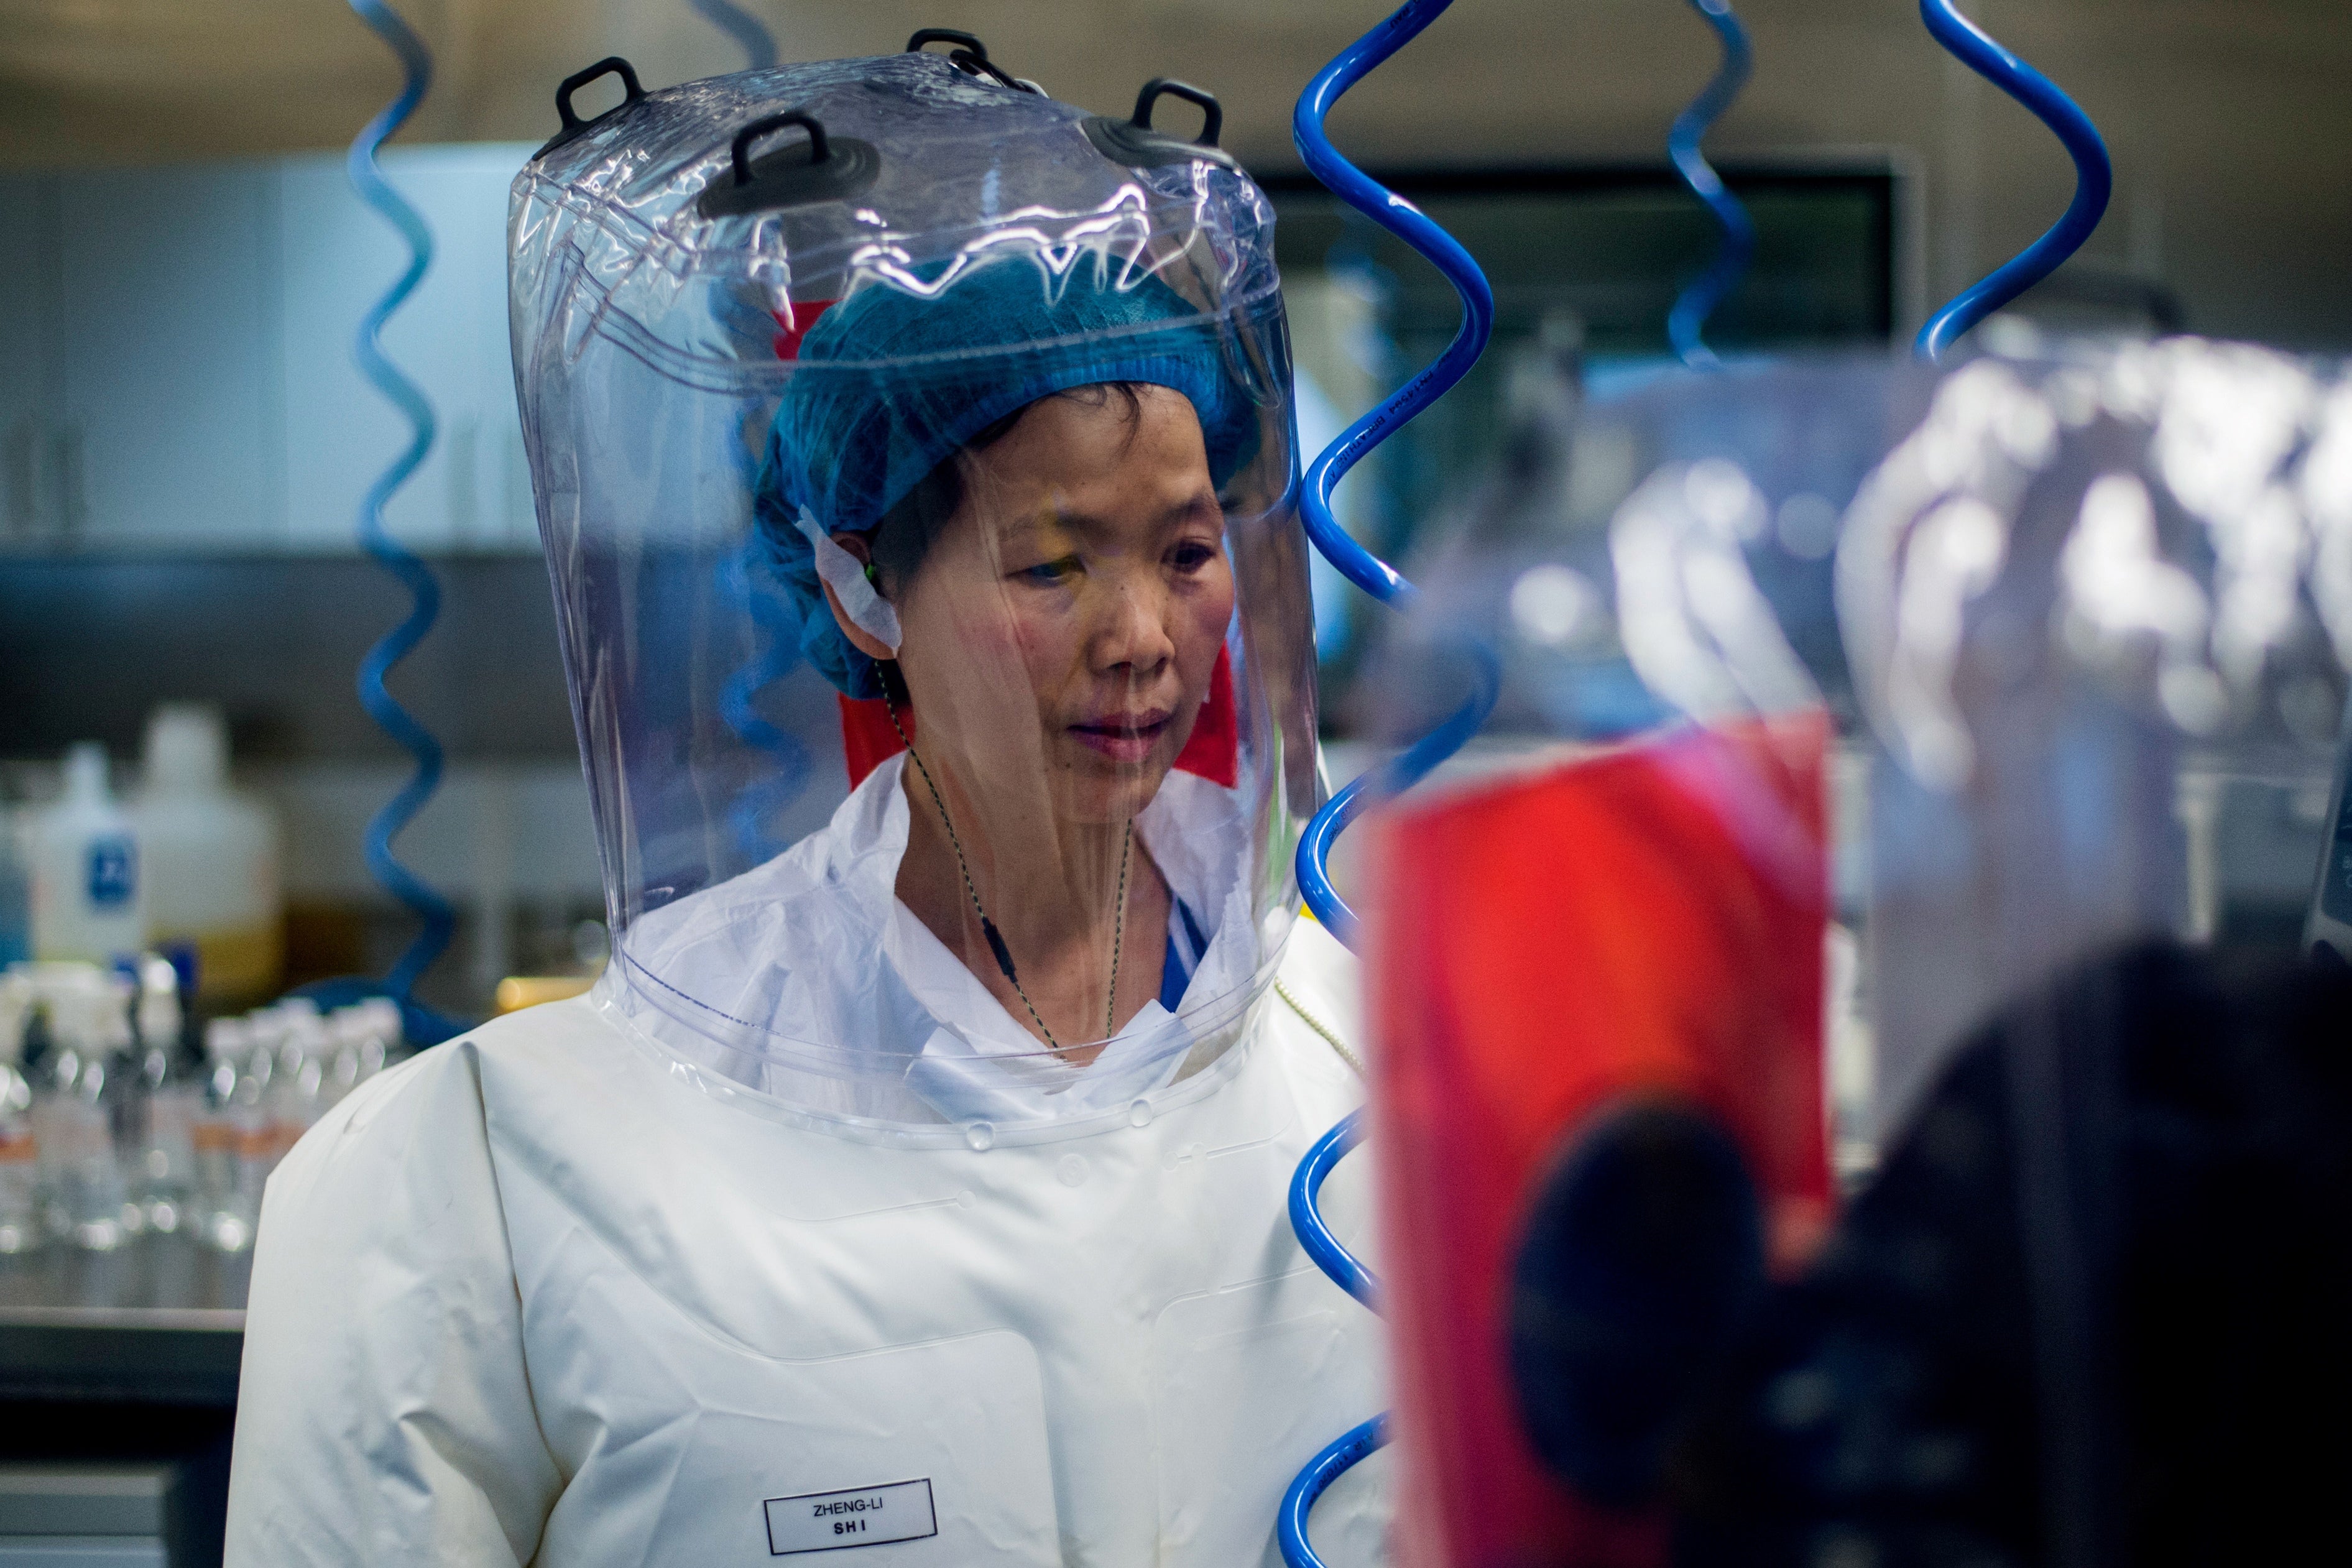 Chinese virologist Shi Zhengli is seen inside the P4 laboratory in Wuhan, capital of China’s Hubei province, on 23 February, 2017. Dr Shi has dismissed questions around whether Covid-19 may have originated in her lab as ‘filth’.